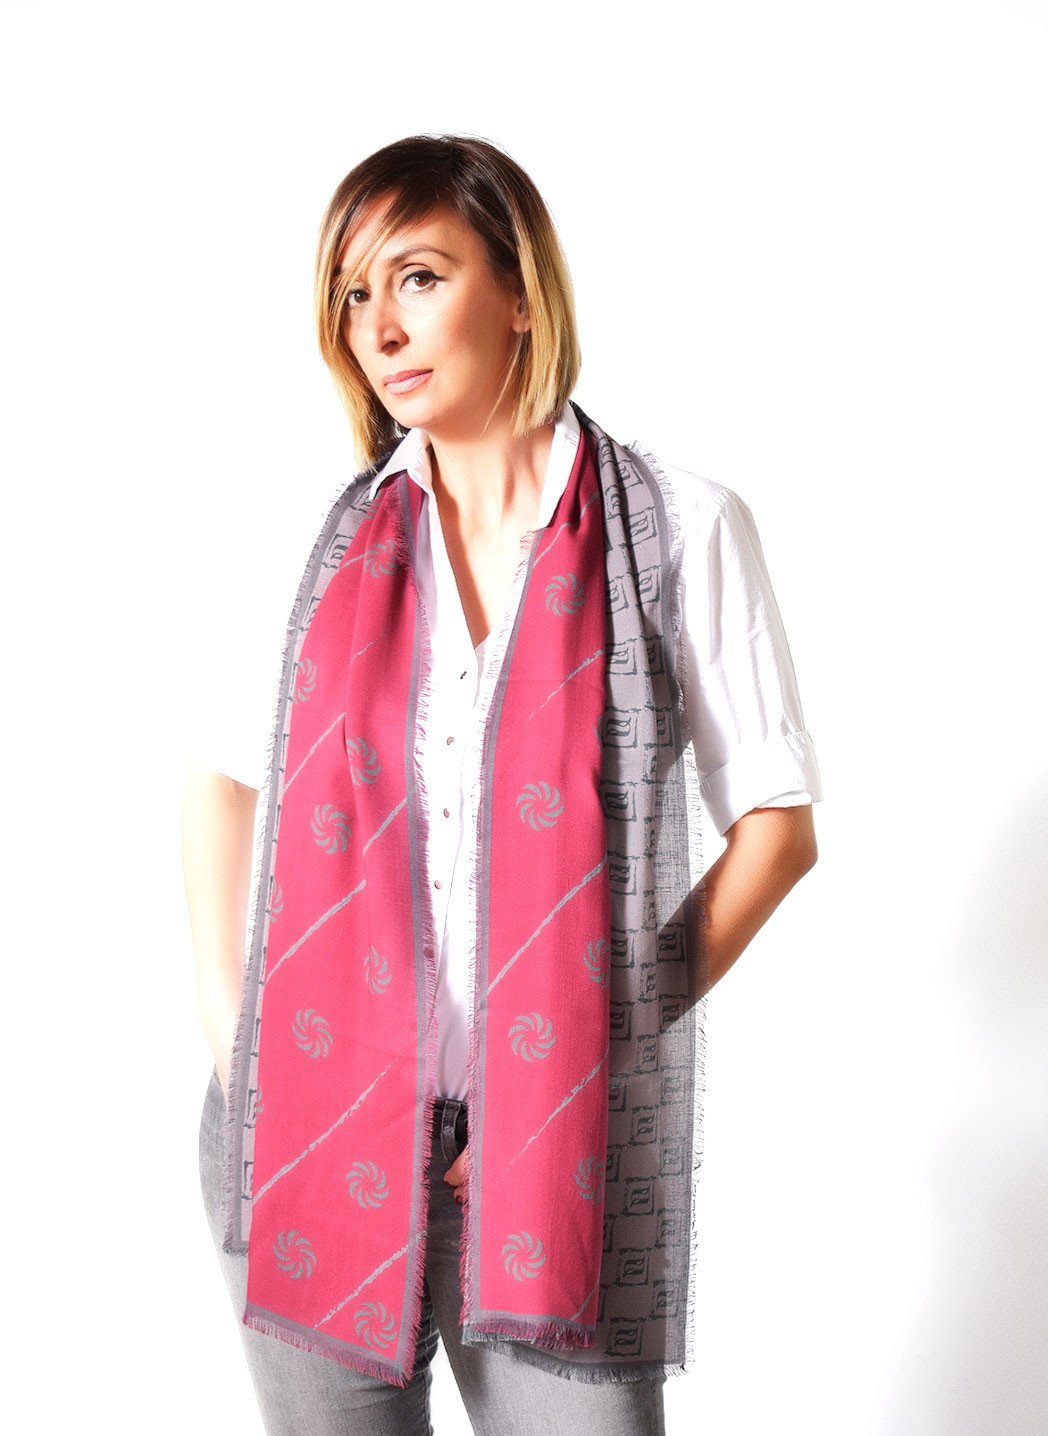 Anet's Collection Eternity Burgundy Unisex Scarf